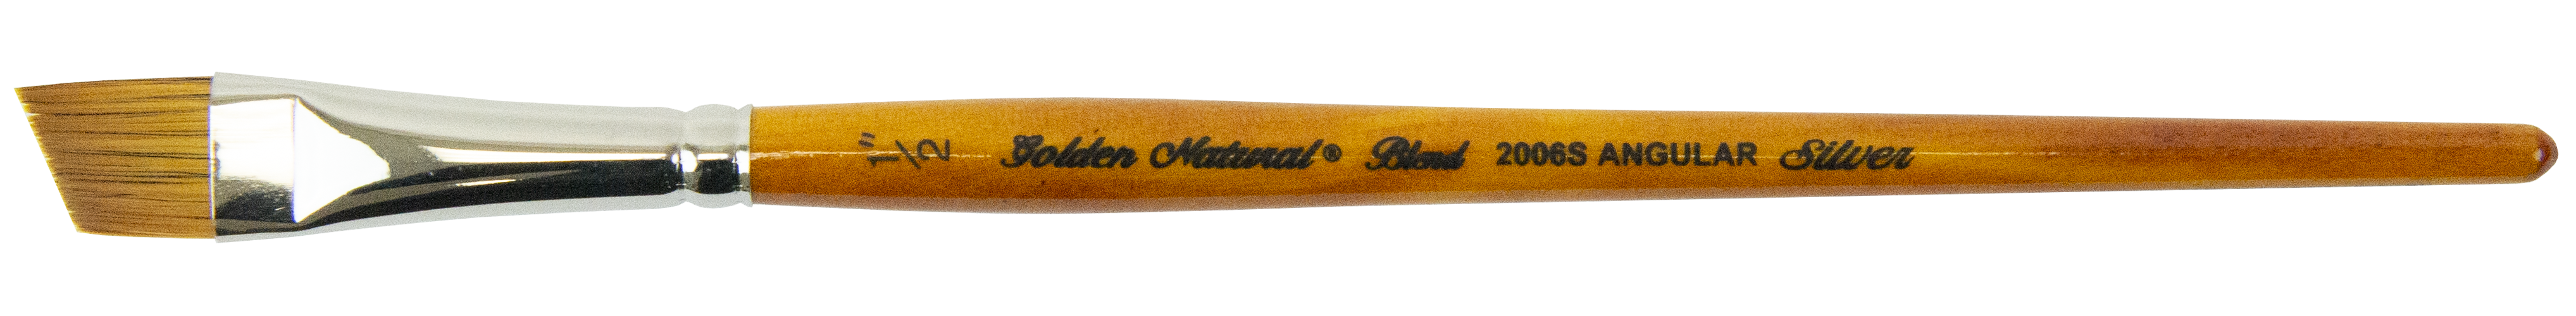 Silver Brush  Golden Natural 2006S Angle